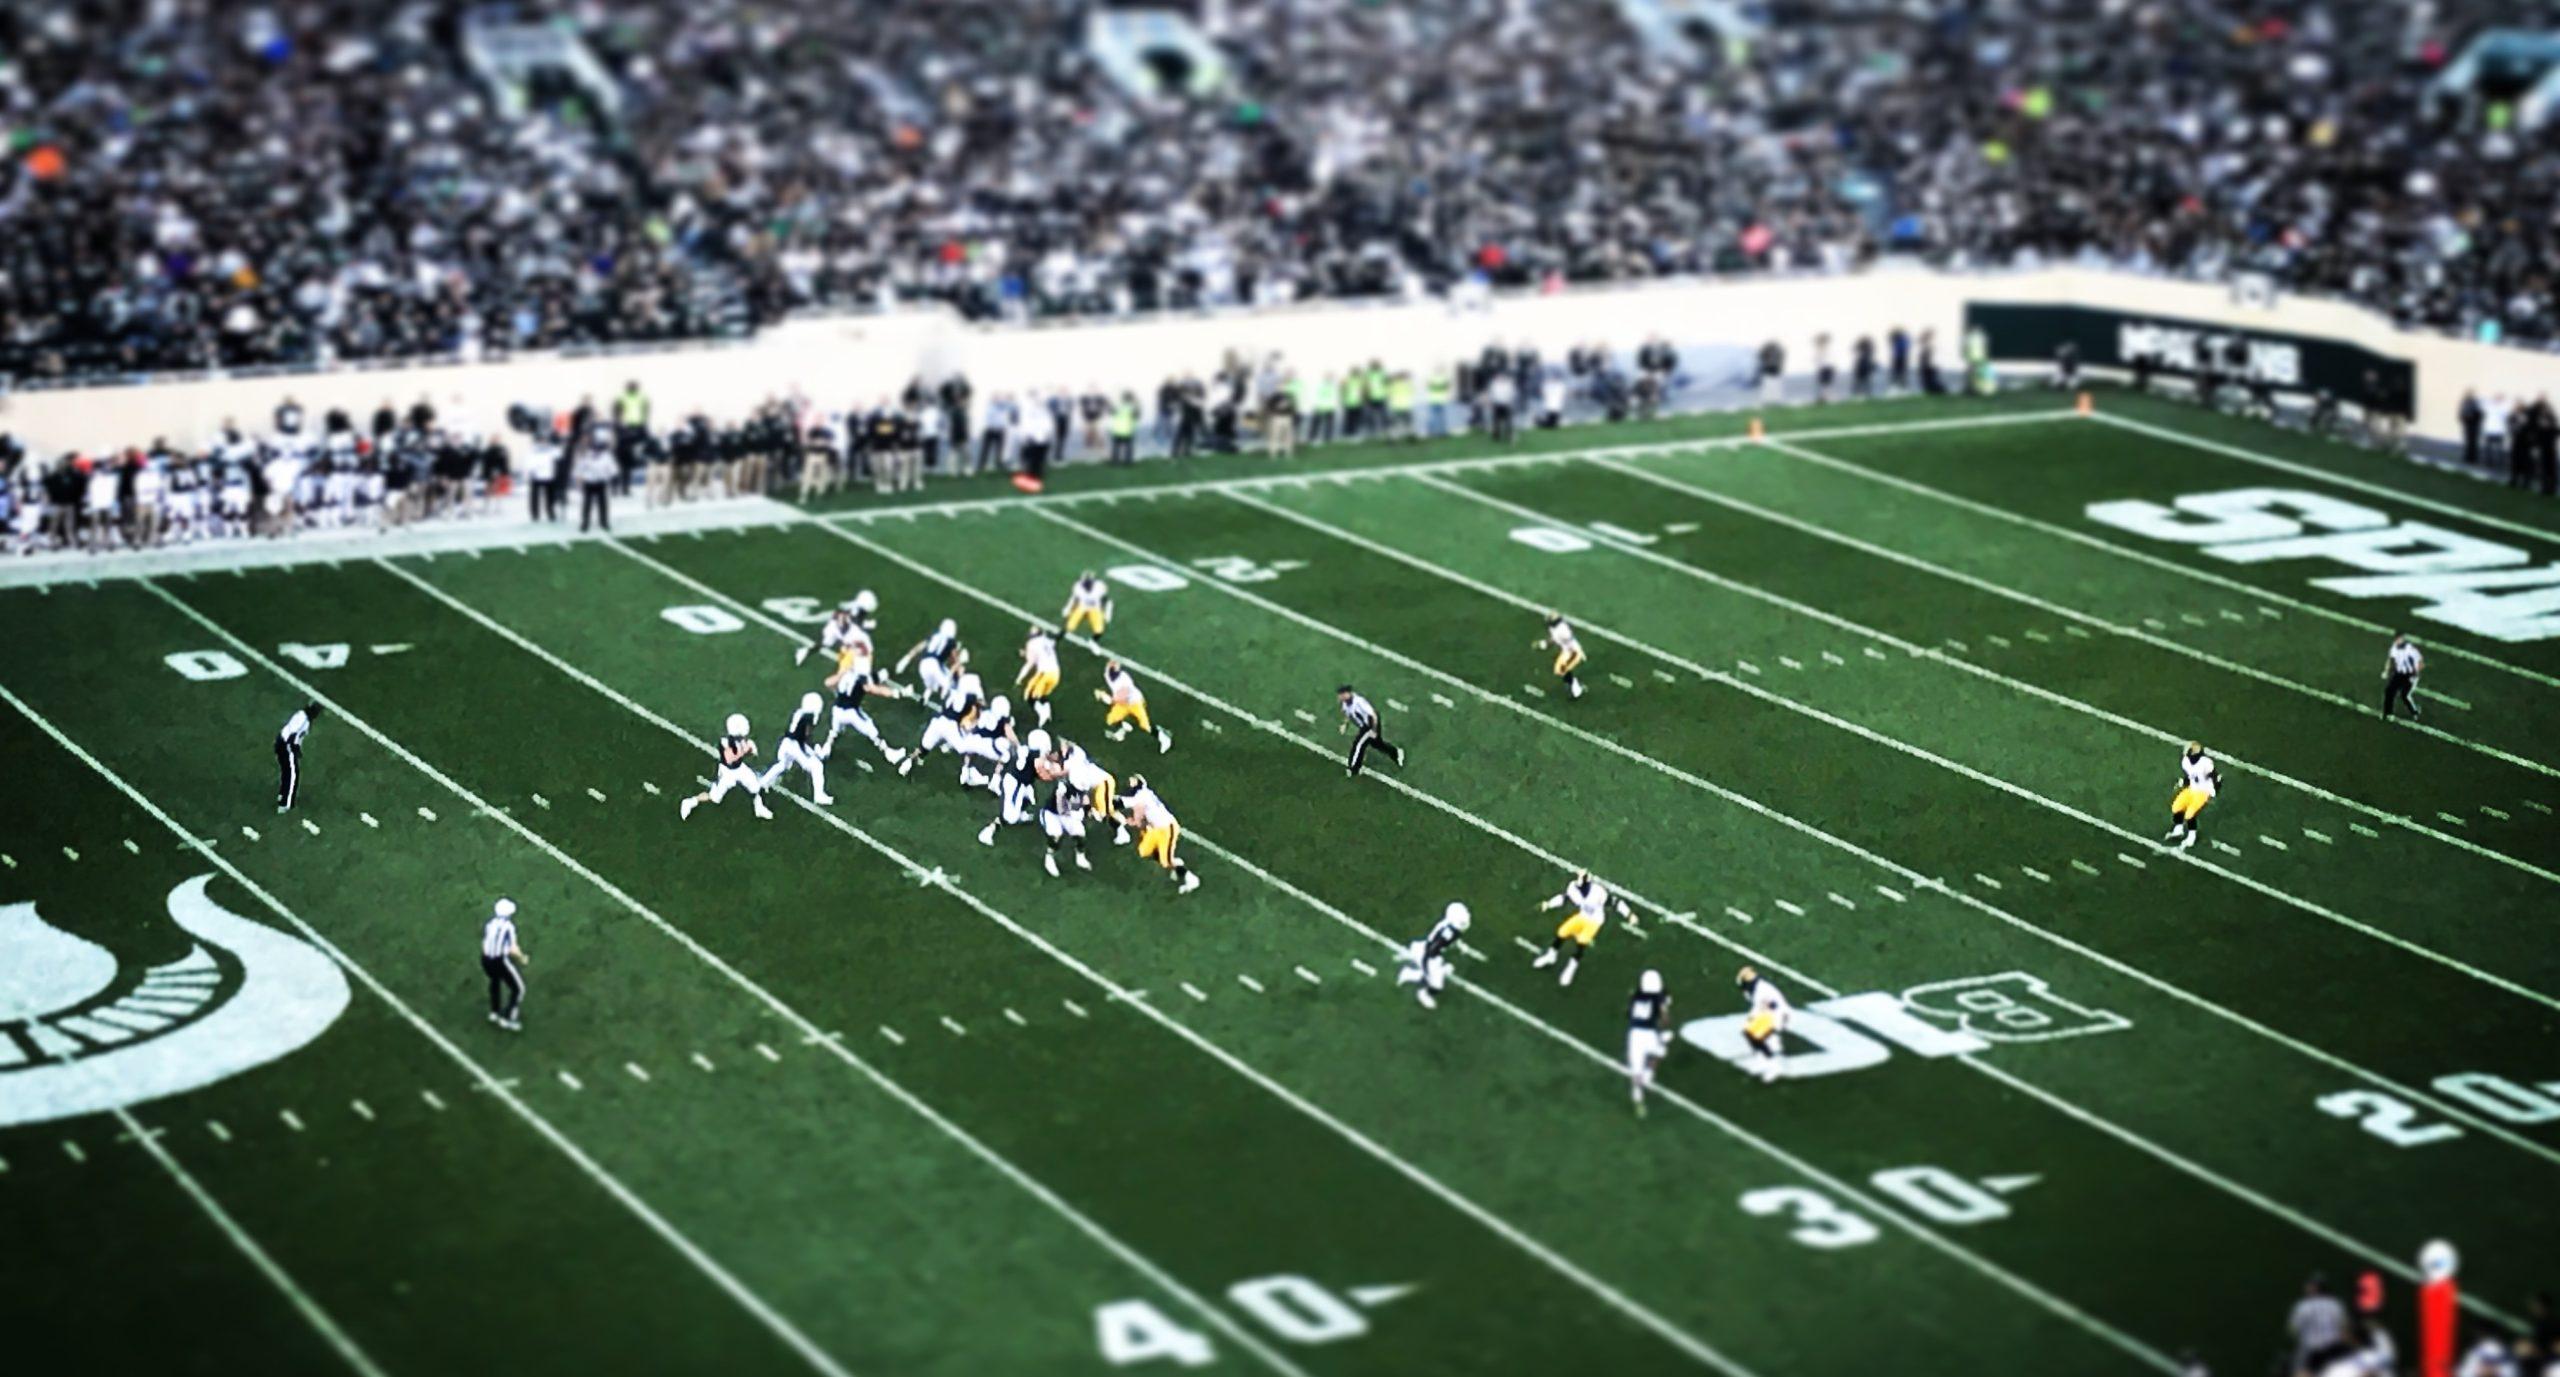 American football match played in a packed stadium.